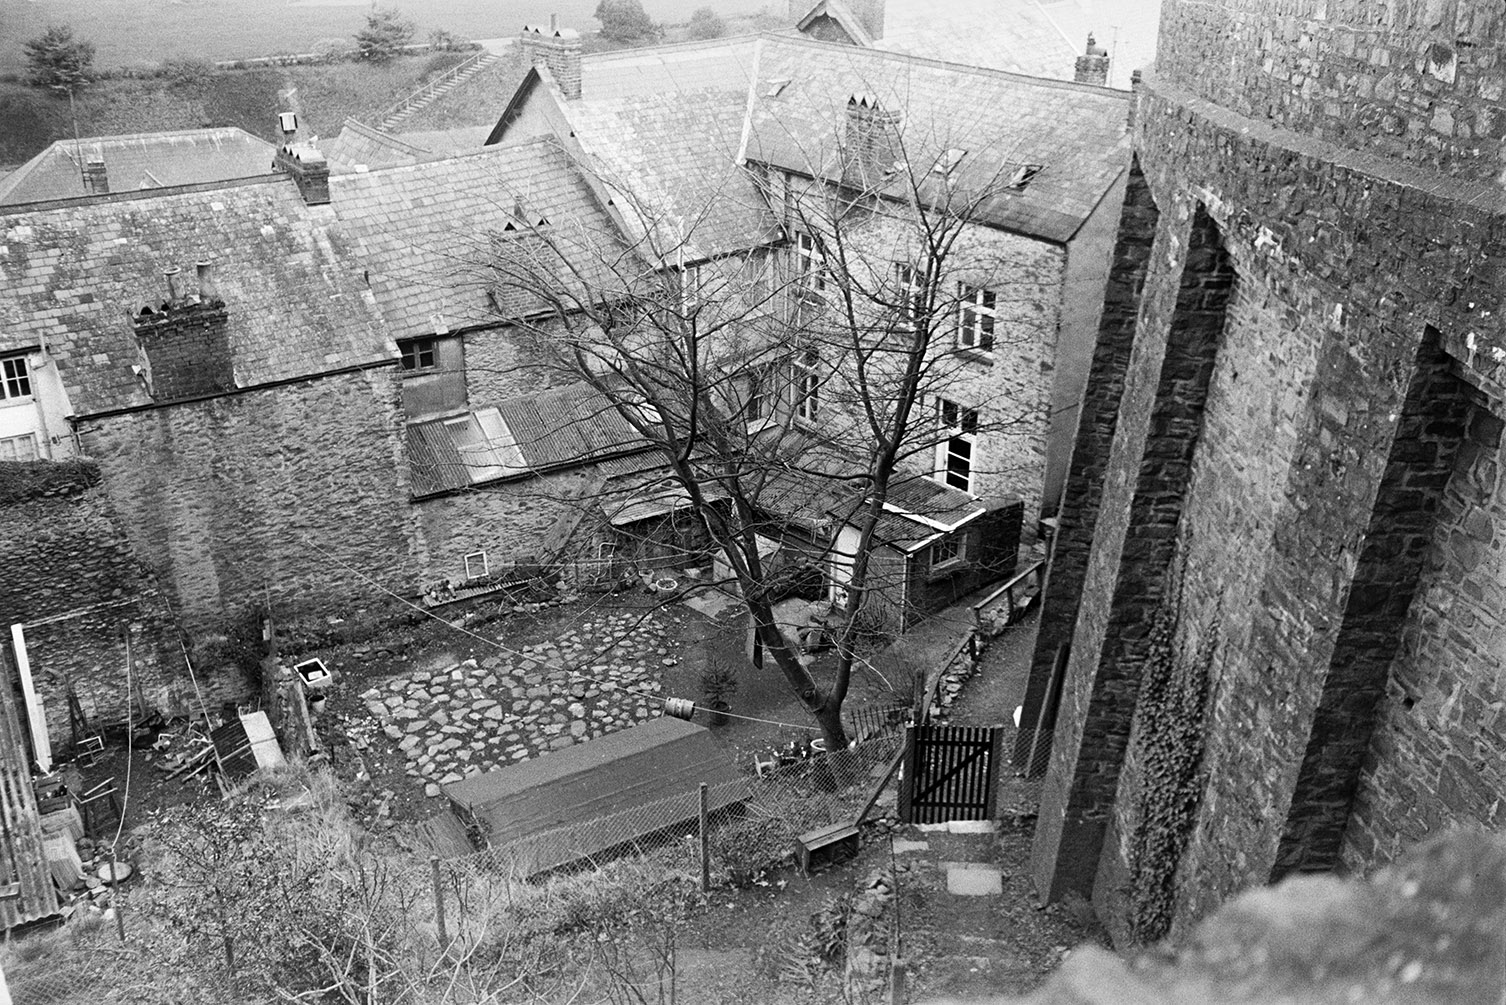 The back yard of houses in Lynmouth with sheds and a cobbled patio. The image is taken from a stone bridge or structure above the houses.